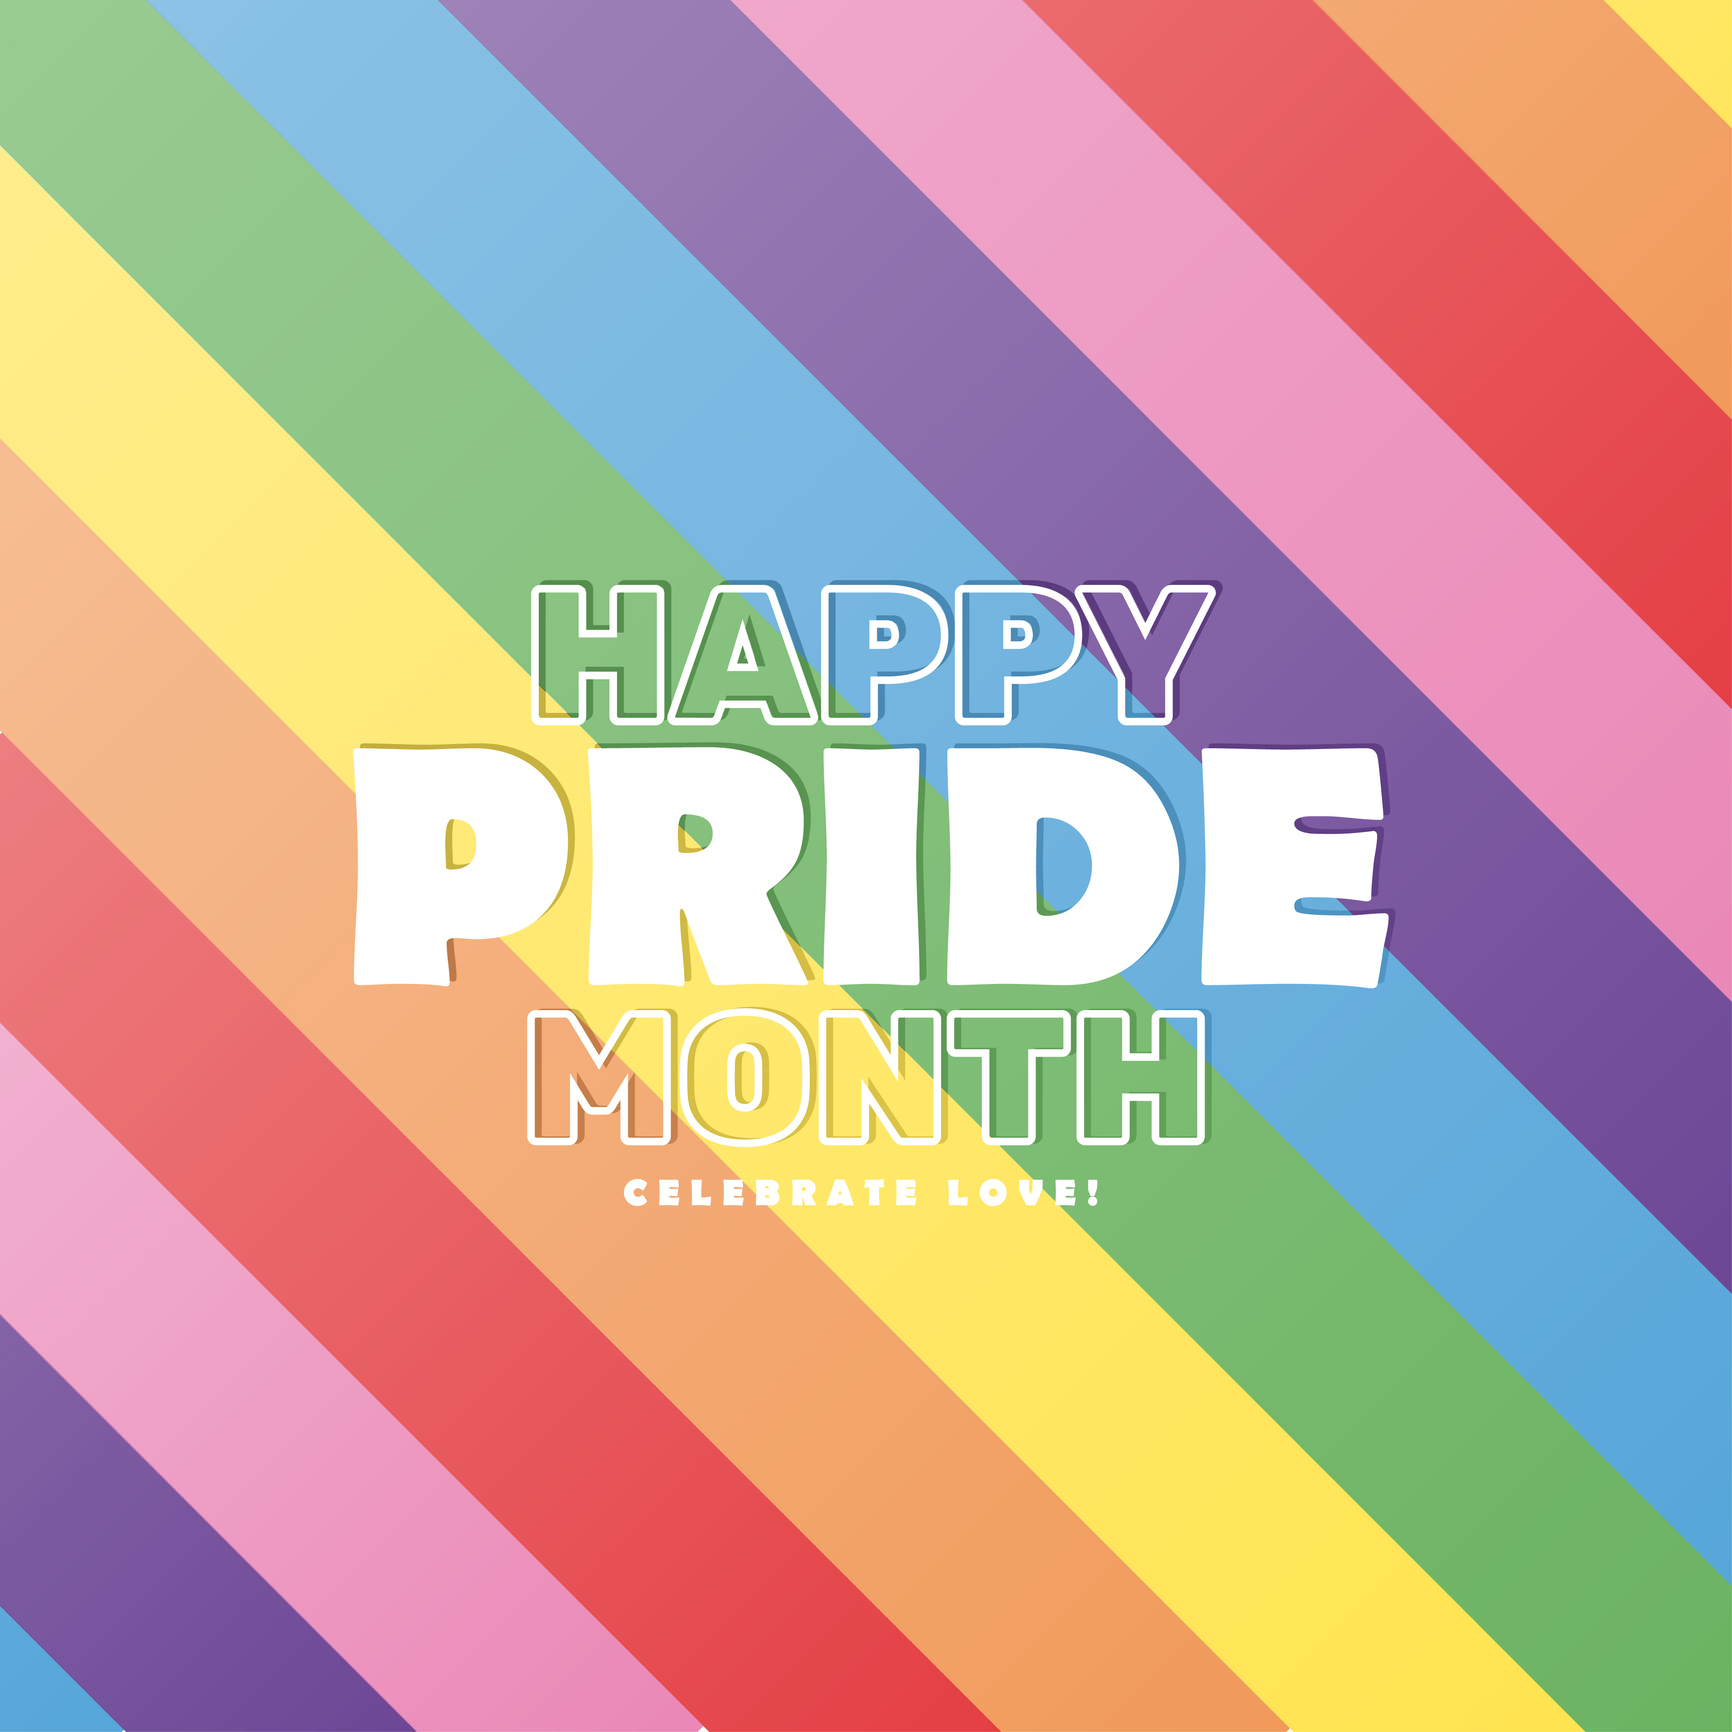 "Happy Pride Month" written over a rainbow background